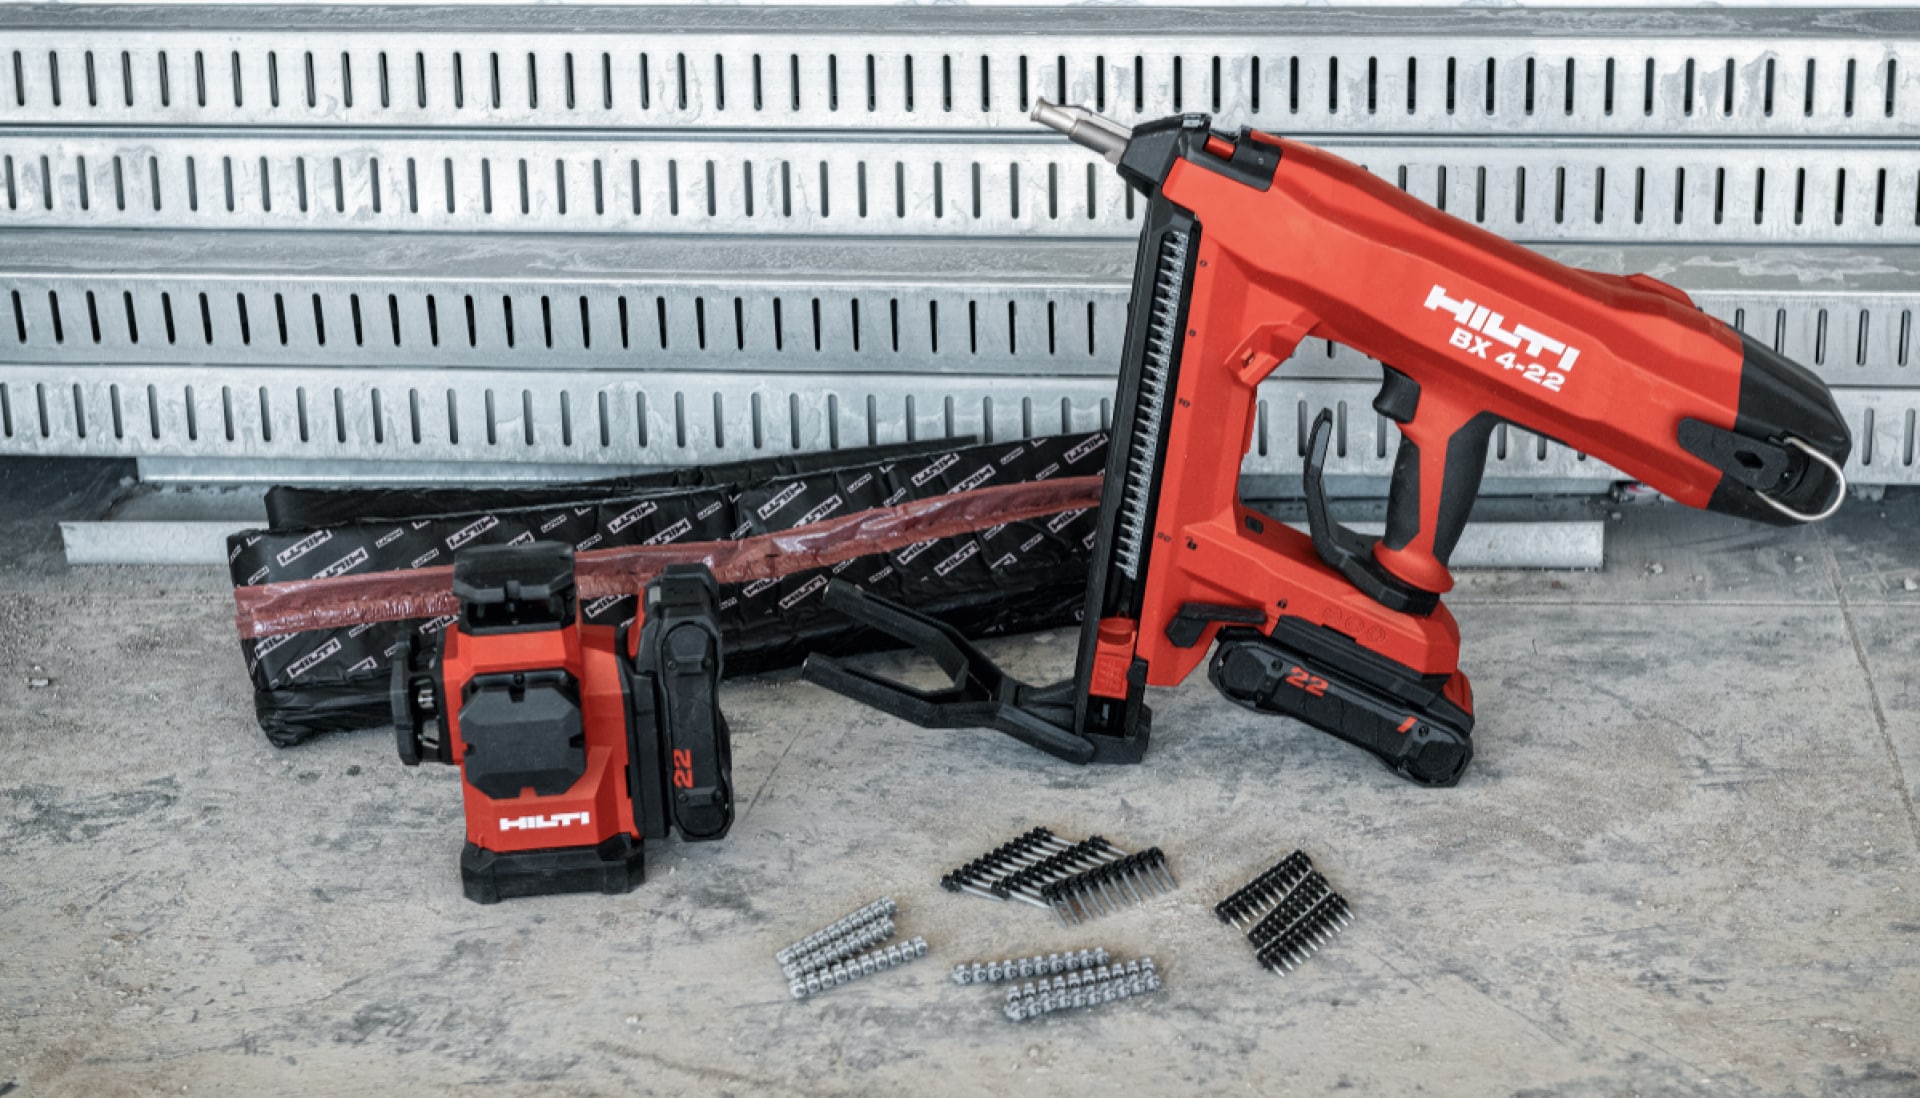 Hilti's BX 4-22 Battery-powered nailer and PM 50MG-22 Multi-line laser level ready to be put to work